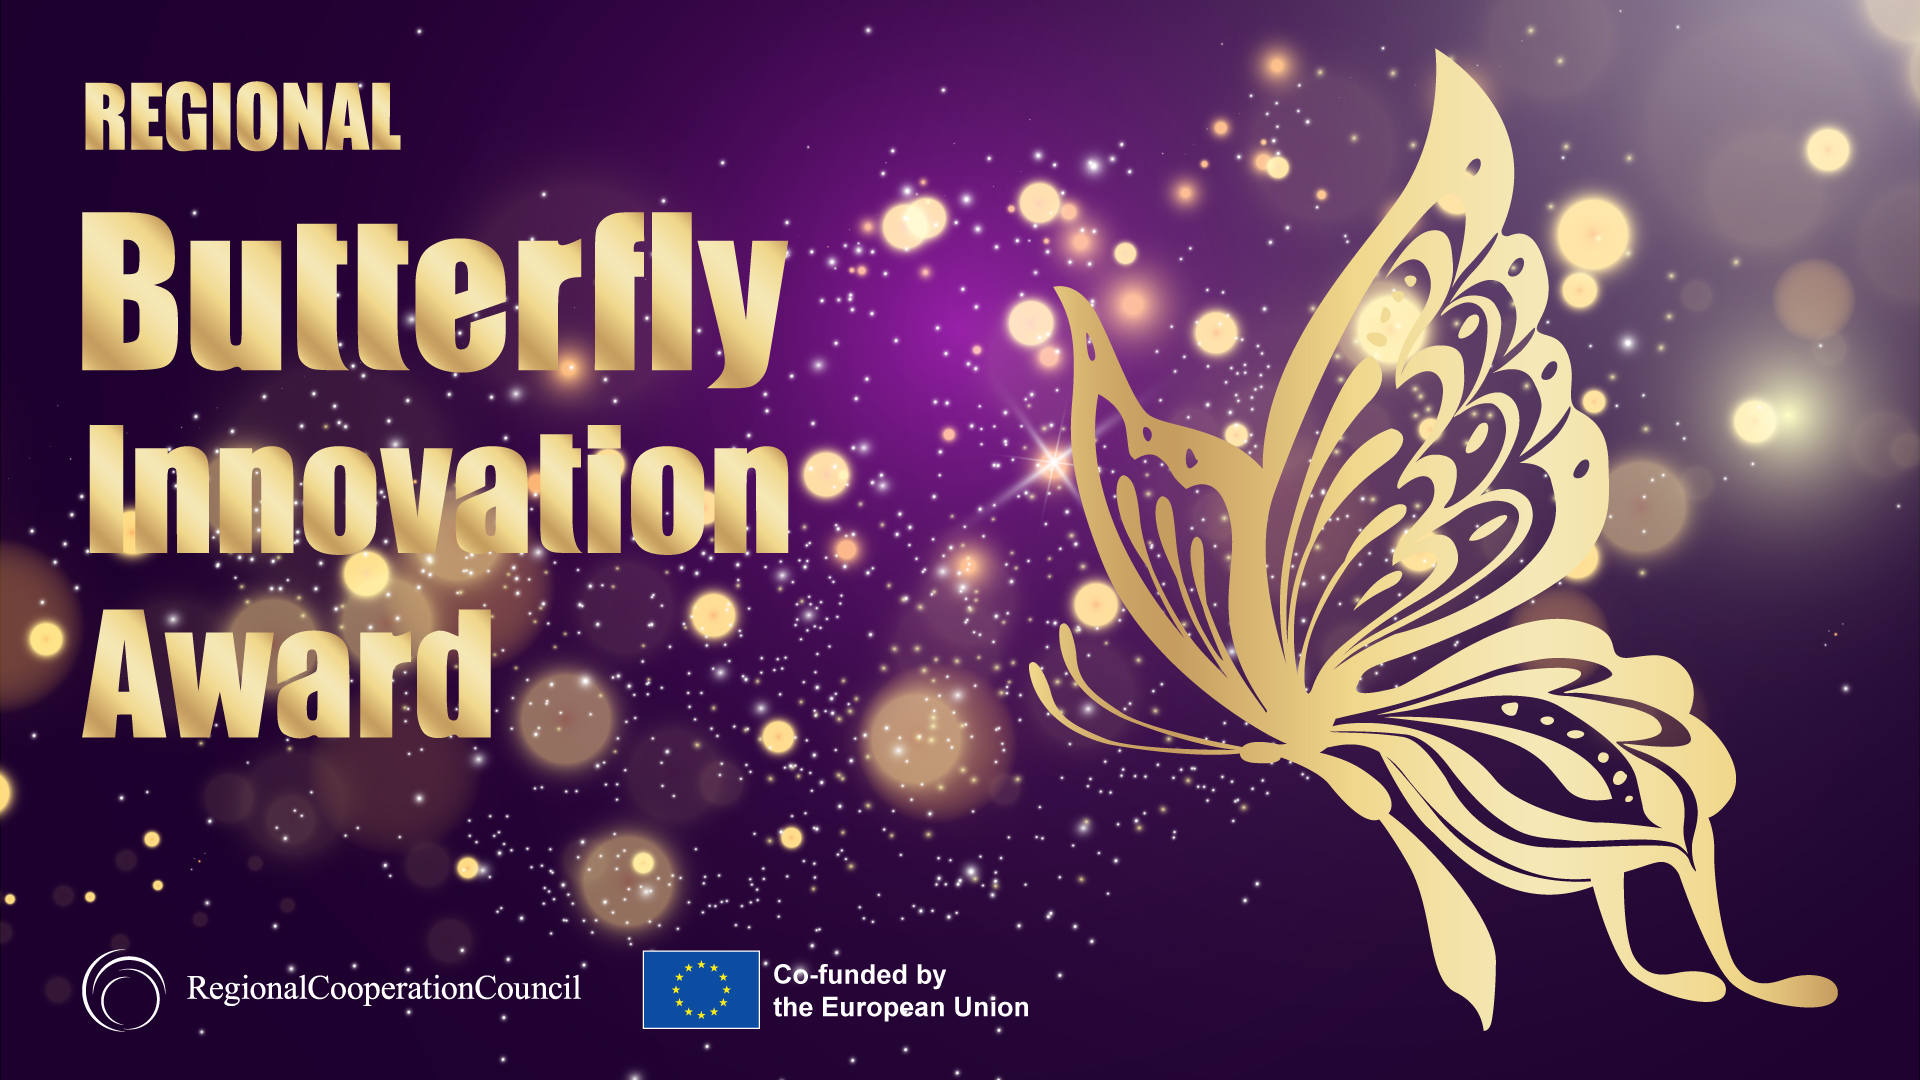 RCC launched a Regional Butterfly Innovation Award seeking innovative, scalable and market-based solutions from the Western Balkans (Design: RCC/Samir Dedic)